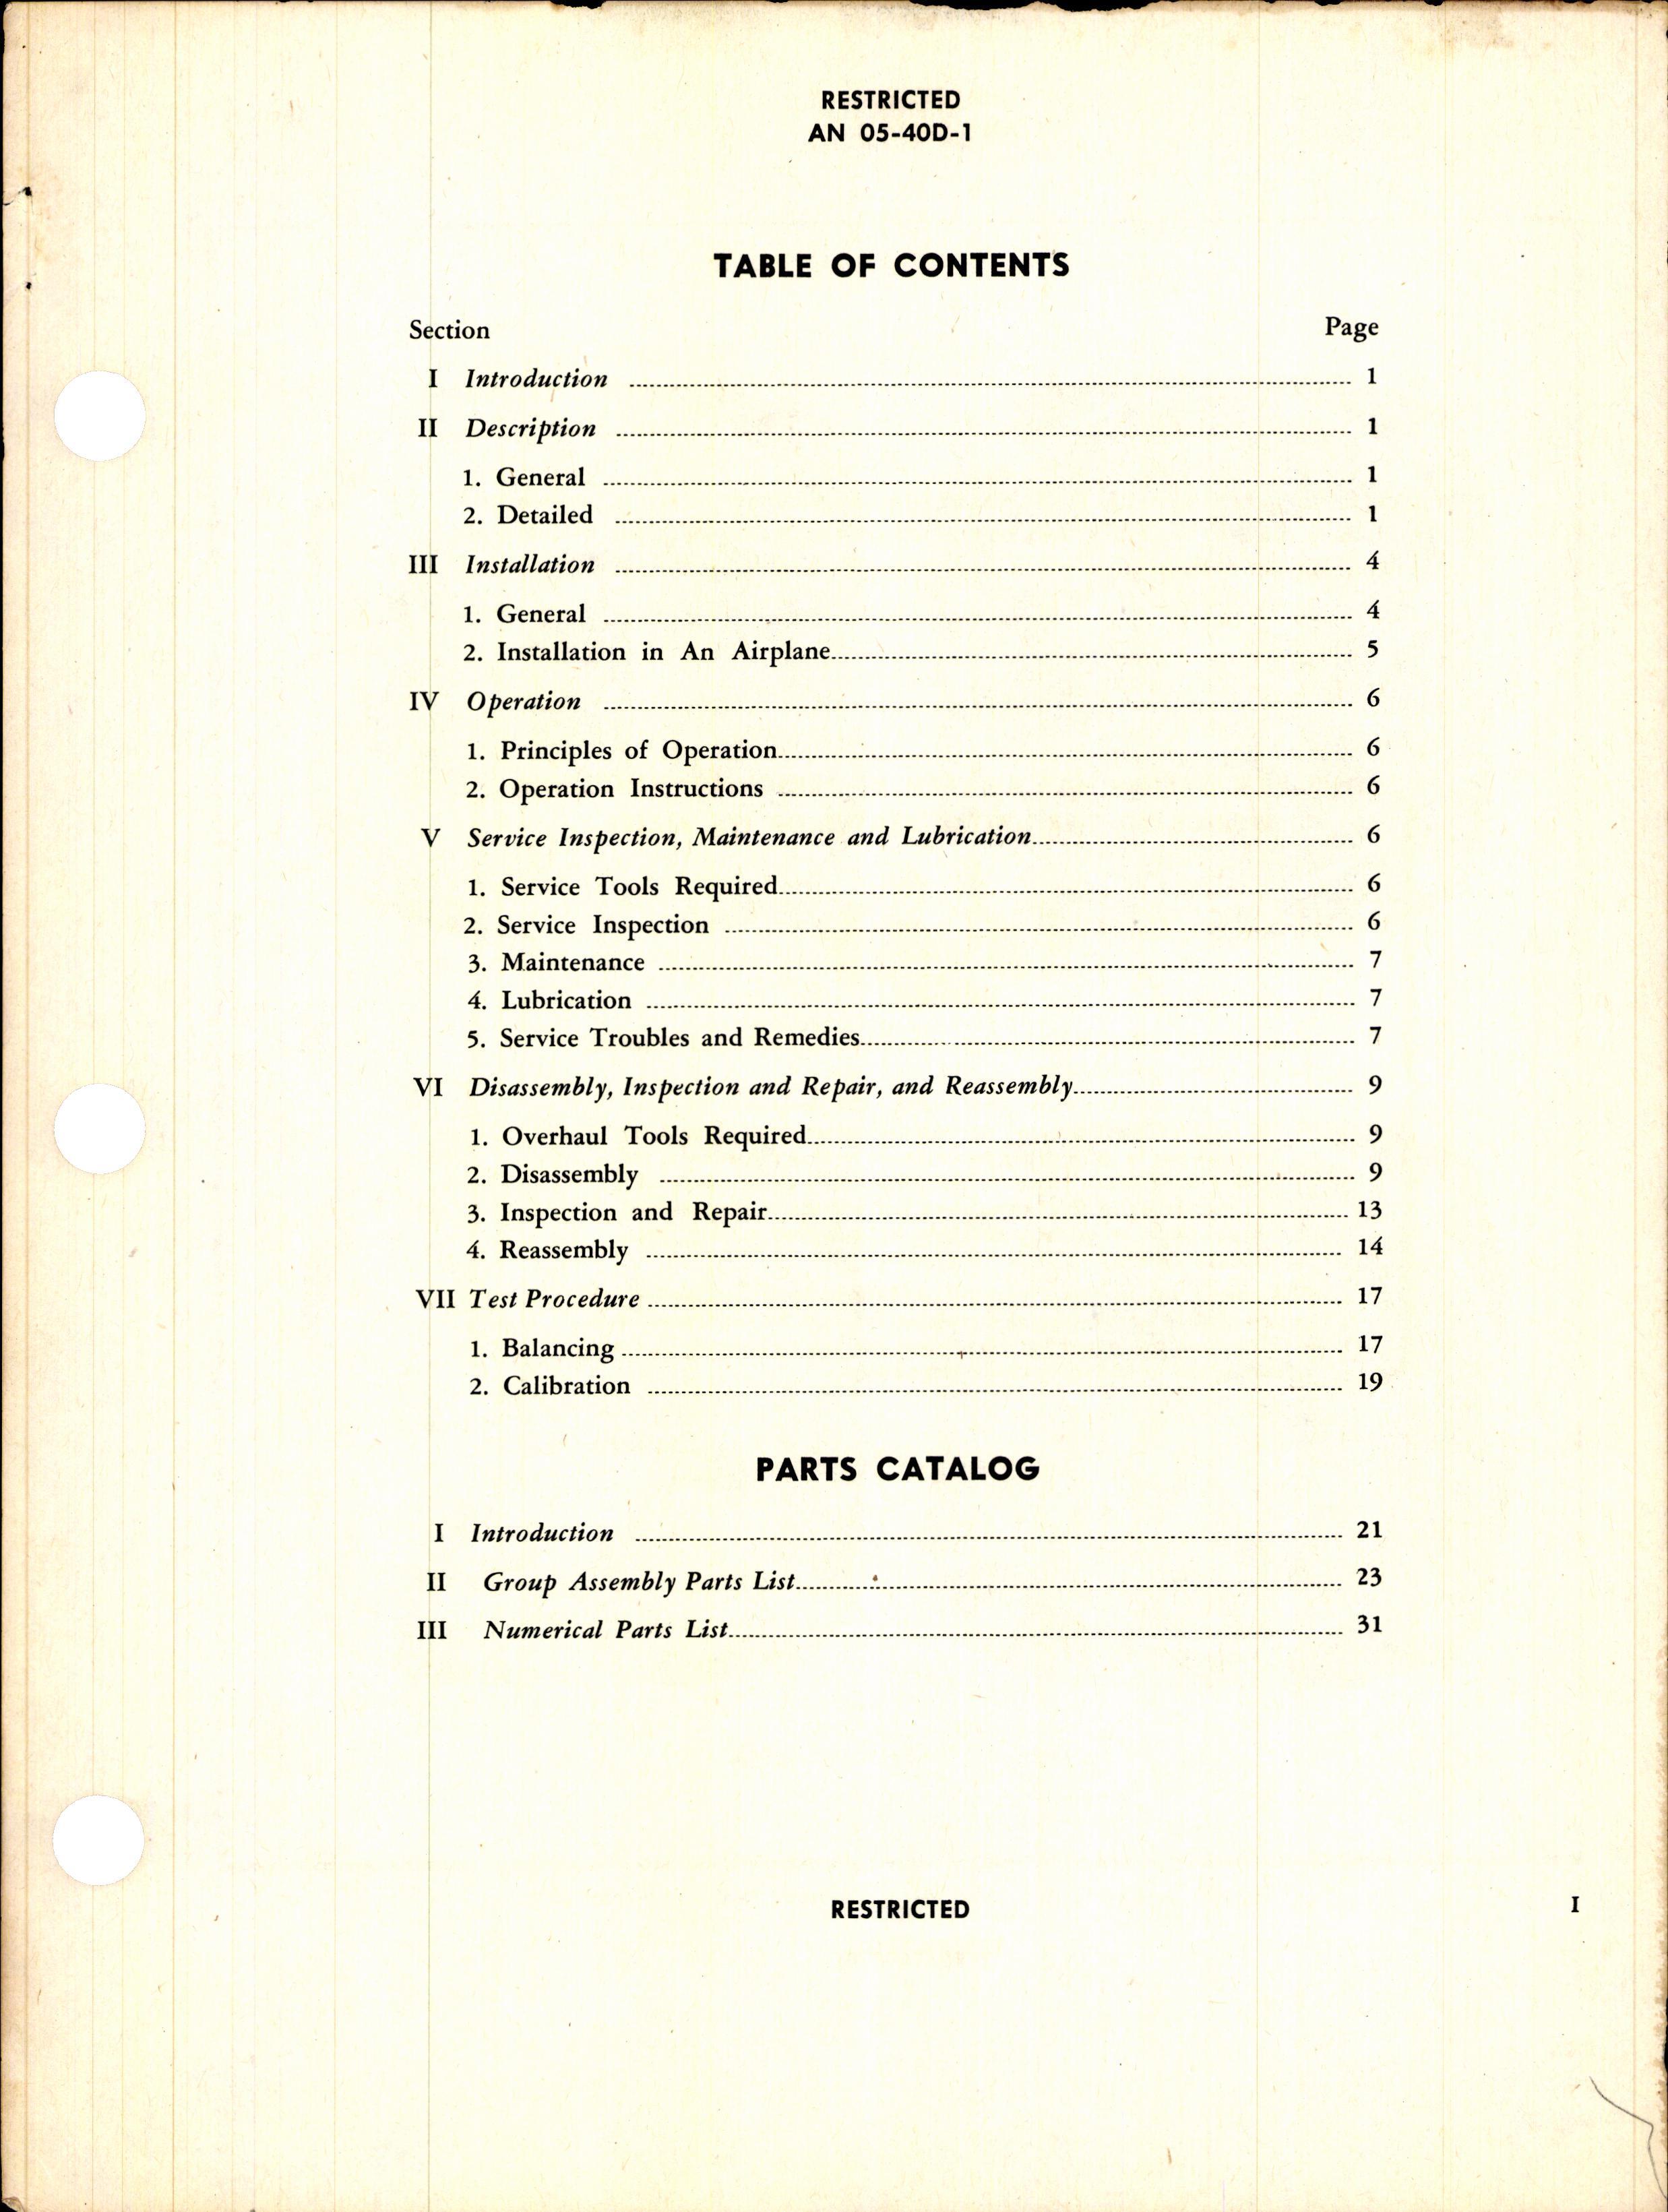 Sample page 3 from AirCorps Library document: Operation, Service, and Overhaul Instructions with Parts Catalog for Type B-9 and B-11 Thermocouple Thermometers